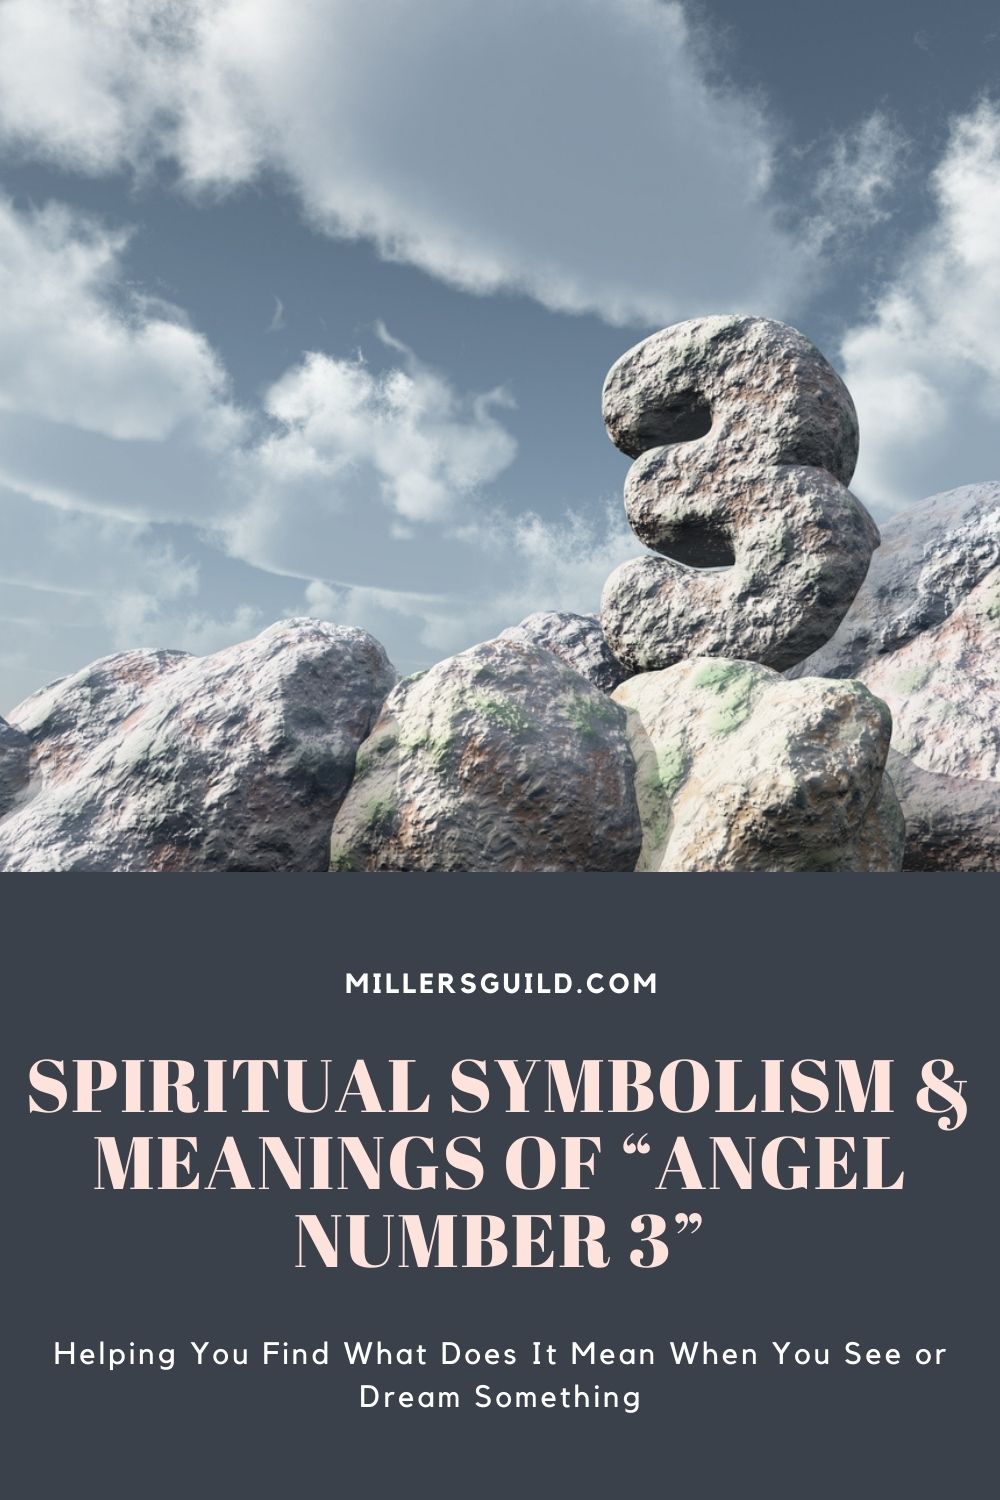 Spiritual Symbolism & Meanings of “Angel Number 3” 2